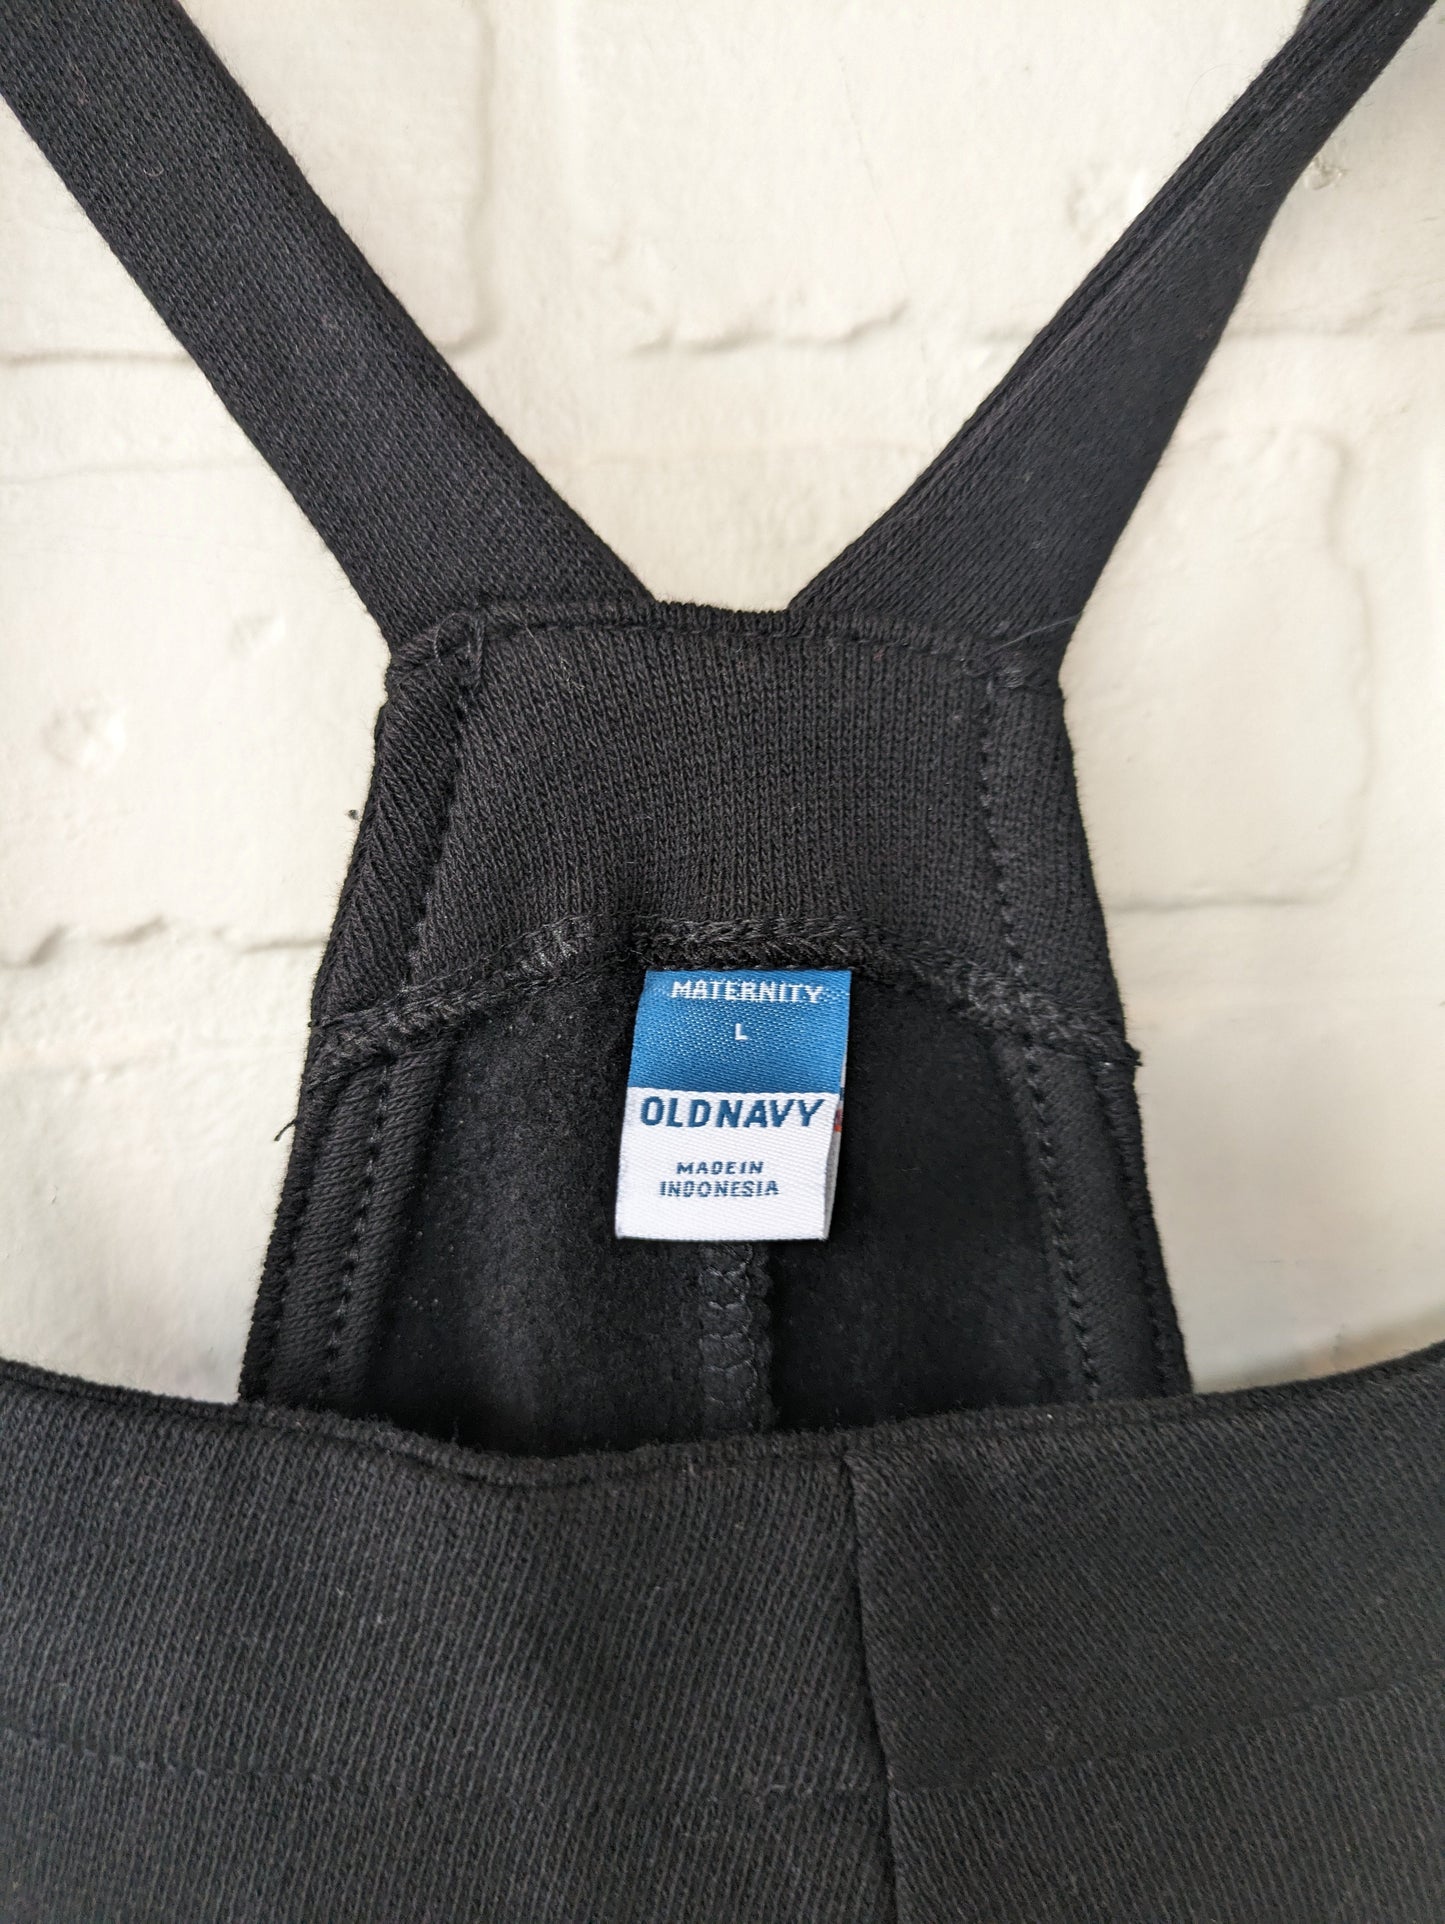 Maternity Overalls By Old Navy  Size: L